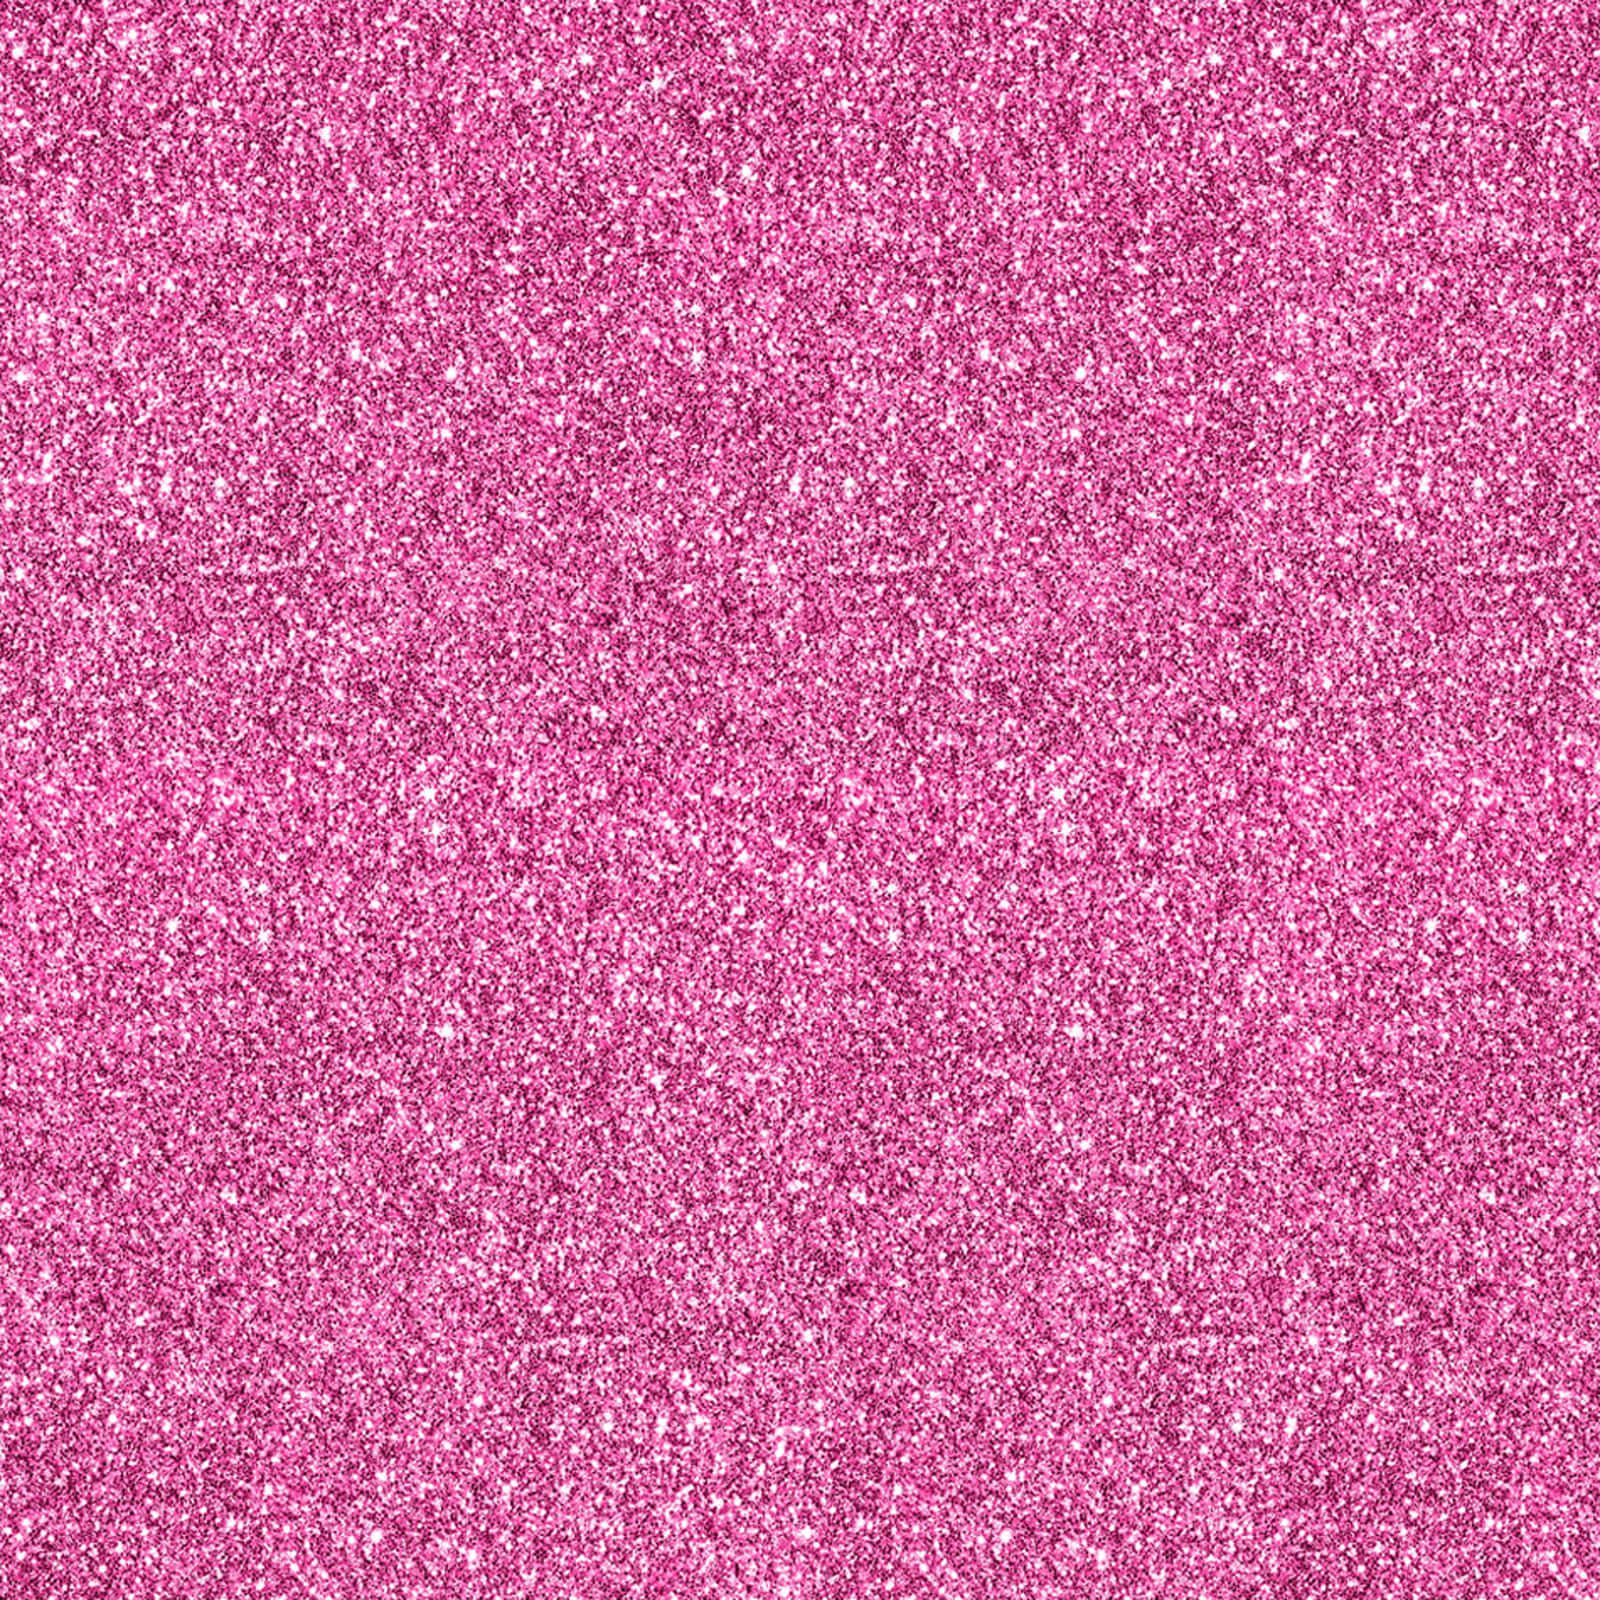 Fascinate your space with the vibrant glittering of pink hues.